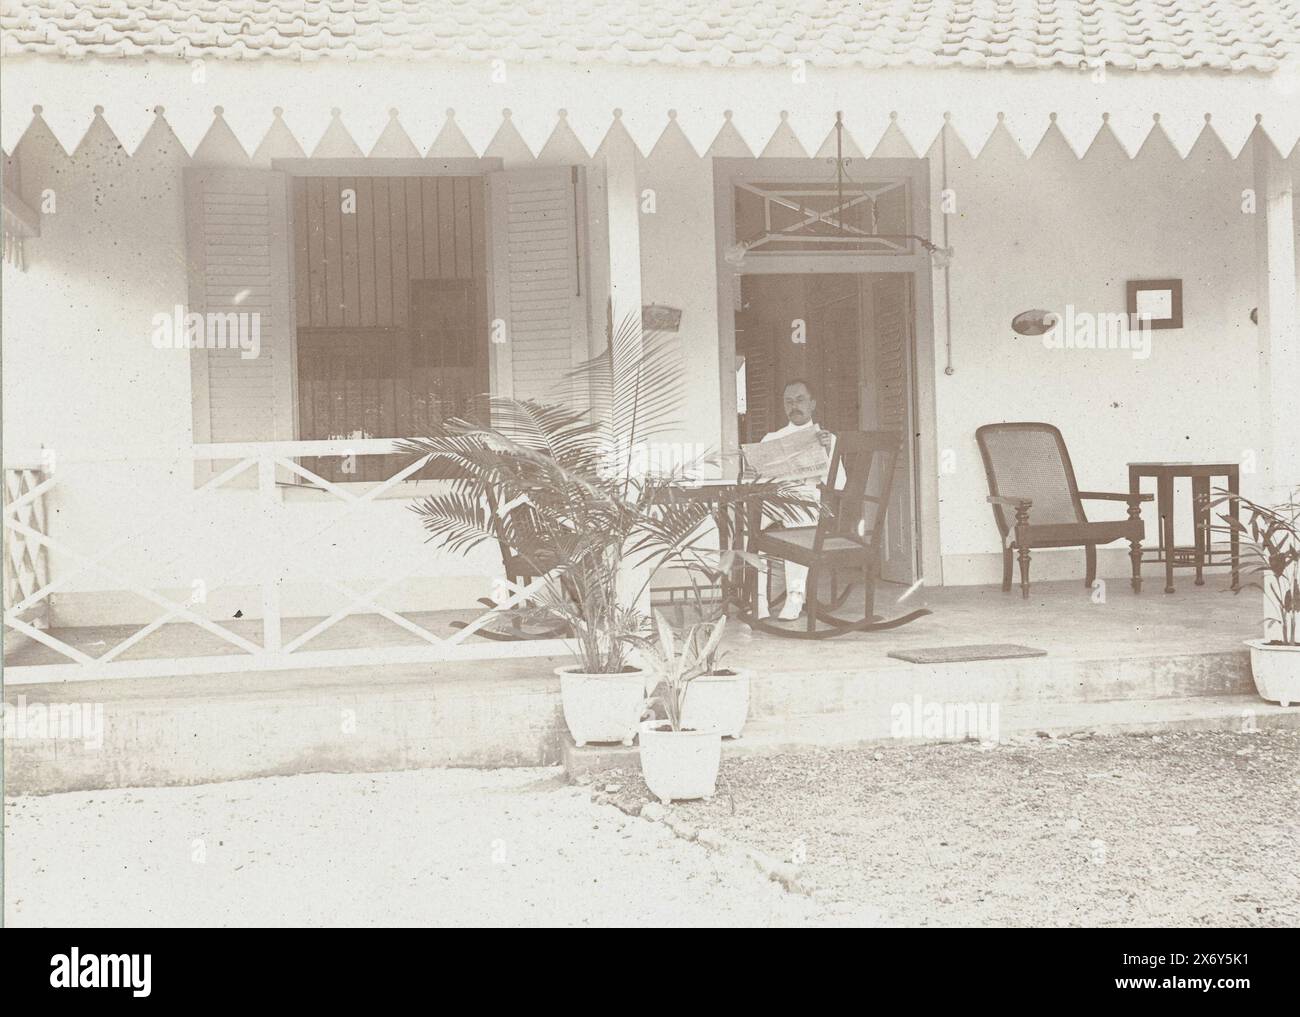 Man in a rocking chair on the veranda of a house., Kaliangel Madoera, August 2. 1910 (title on object), Photographies (series title), Photo from album 'Photographies'., photograph, Frits Freerks Fontein Fz., (attributed to), Frits Freerks Fontein Fz., (attributed to), Madura, (possibly), Netherlands, (possibly), c. 1903, cardboard, height, 79 mm × width, 109 mm, height, 242 mm × width, 333 mm Stock Photo